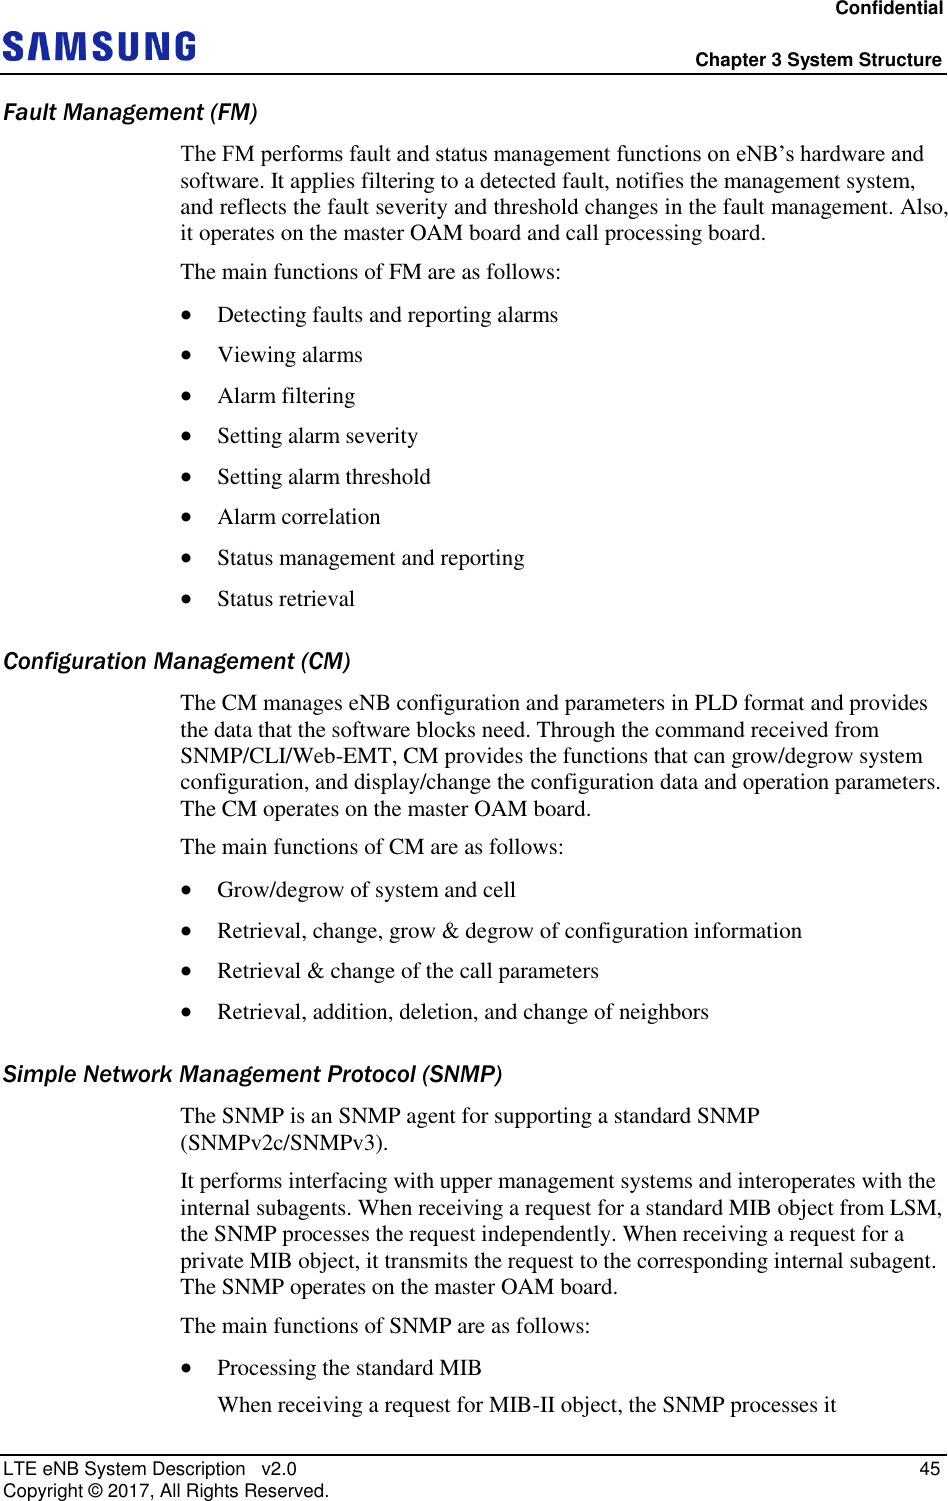 Confidential  Chapter 3 System Structure LTE eNB System Description   v2.0   45 Copyright ©  2017, All Rights Reserved. Fault Management (FM) The FM performs fault and status management functions on eNB’s hardware and software. It applies filtering to a detected fault, notifies the management system, and reflects the fault severity and threshold changes in the fault management. Also, it operates on the master OAM board and call processing board. The main functions of FM are as follows:  Detecting faults and reporting alarms  Viewing alarms  Alarm filtering  Setting alarm severity  Setting alarm threshold  Alarm correlation  Status management and reporting  Status retrieval Configuration Management (CM) The CM manages eNB configuration and parameters in PLD format and provides the data that the software blocks need. Through the command received from SNMP/CLI/Web-EMT, CM provides the functions that can grow/degrow system configuration, and display/change the configuration data and operation parameters. The CM operates on the master OAM board. The main functions of CM are as follows:  Grow/degrow of system and cell  Retrieval, change, grow &amp; degrow of configuration information  Retrieval &amp; change of the call parameters  Retrieval, addition, deletion, and change of neighbors Simple Network Management Protocol (SNMP) The SNMP is an SNMP agent for supporting a standard SNMP (SNMPv2c/SNMPv3). It performs interfacing with upper management systems and interoperates with the internal subagents. When receiving a request for a standard MIB object from LSM, the SNMP processes the request independently. When receiving a request for a private MIB object, it transmits the request to the corresponding internal subagent. The SNMP operates on the master OAM board. The main functions of SNMP are as follows:  Processing the standard MIB When receiving a request for MIB-II object, the SNMP processes it 